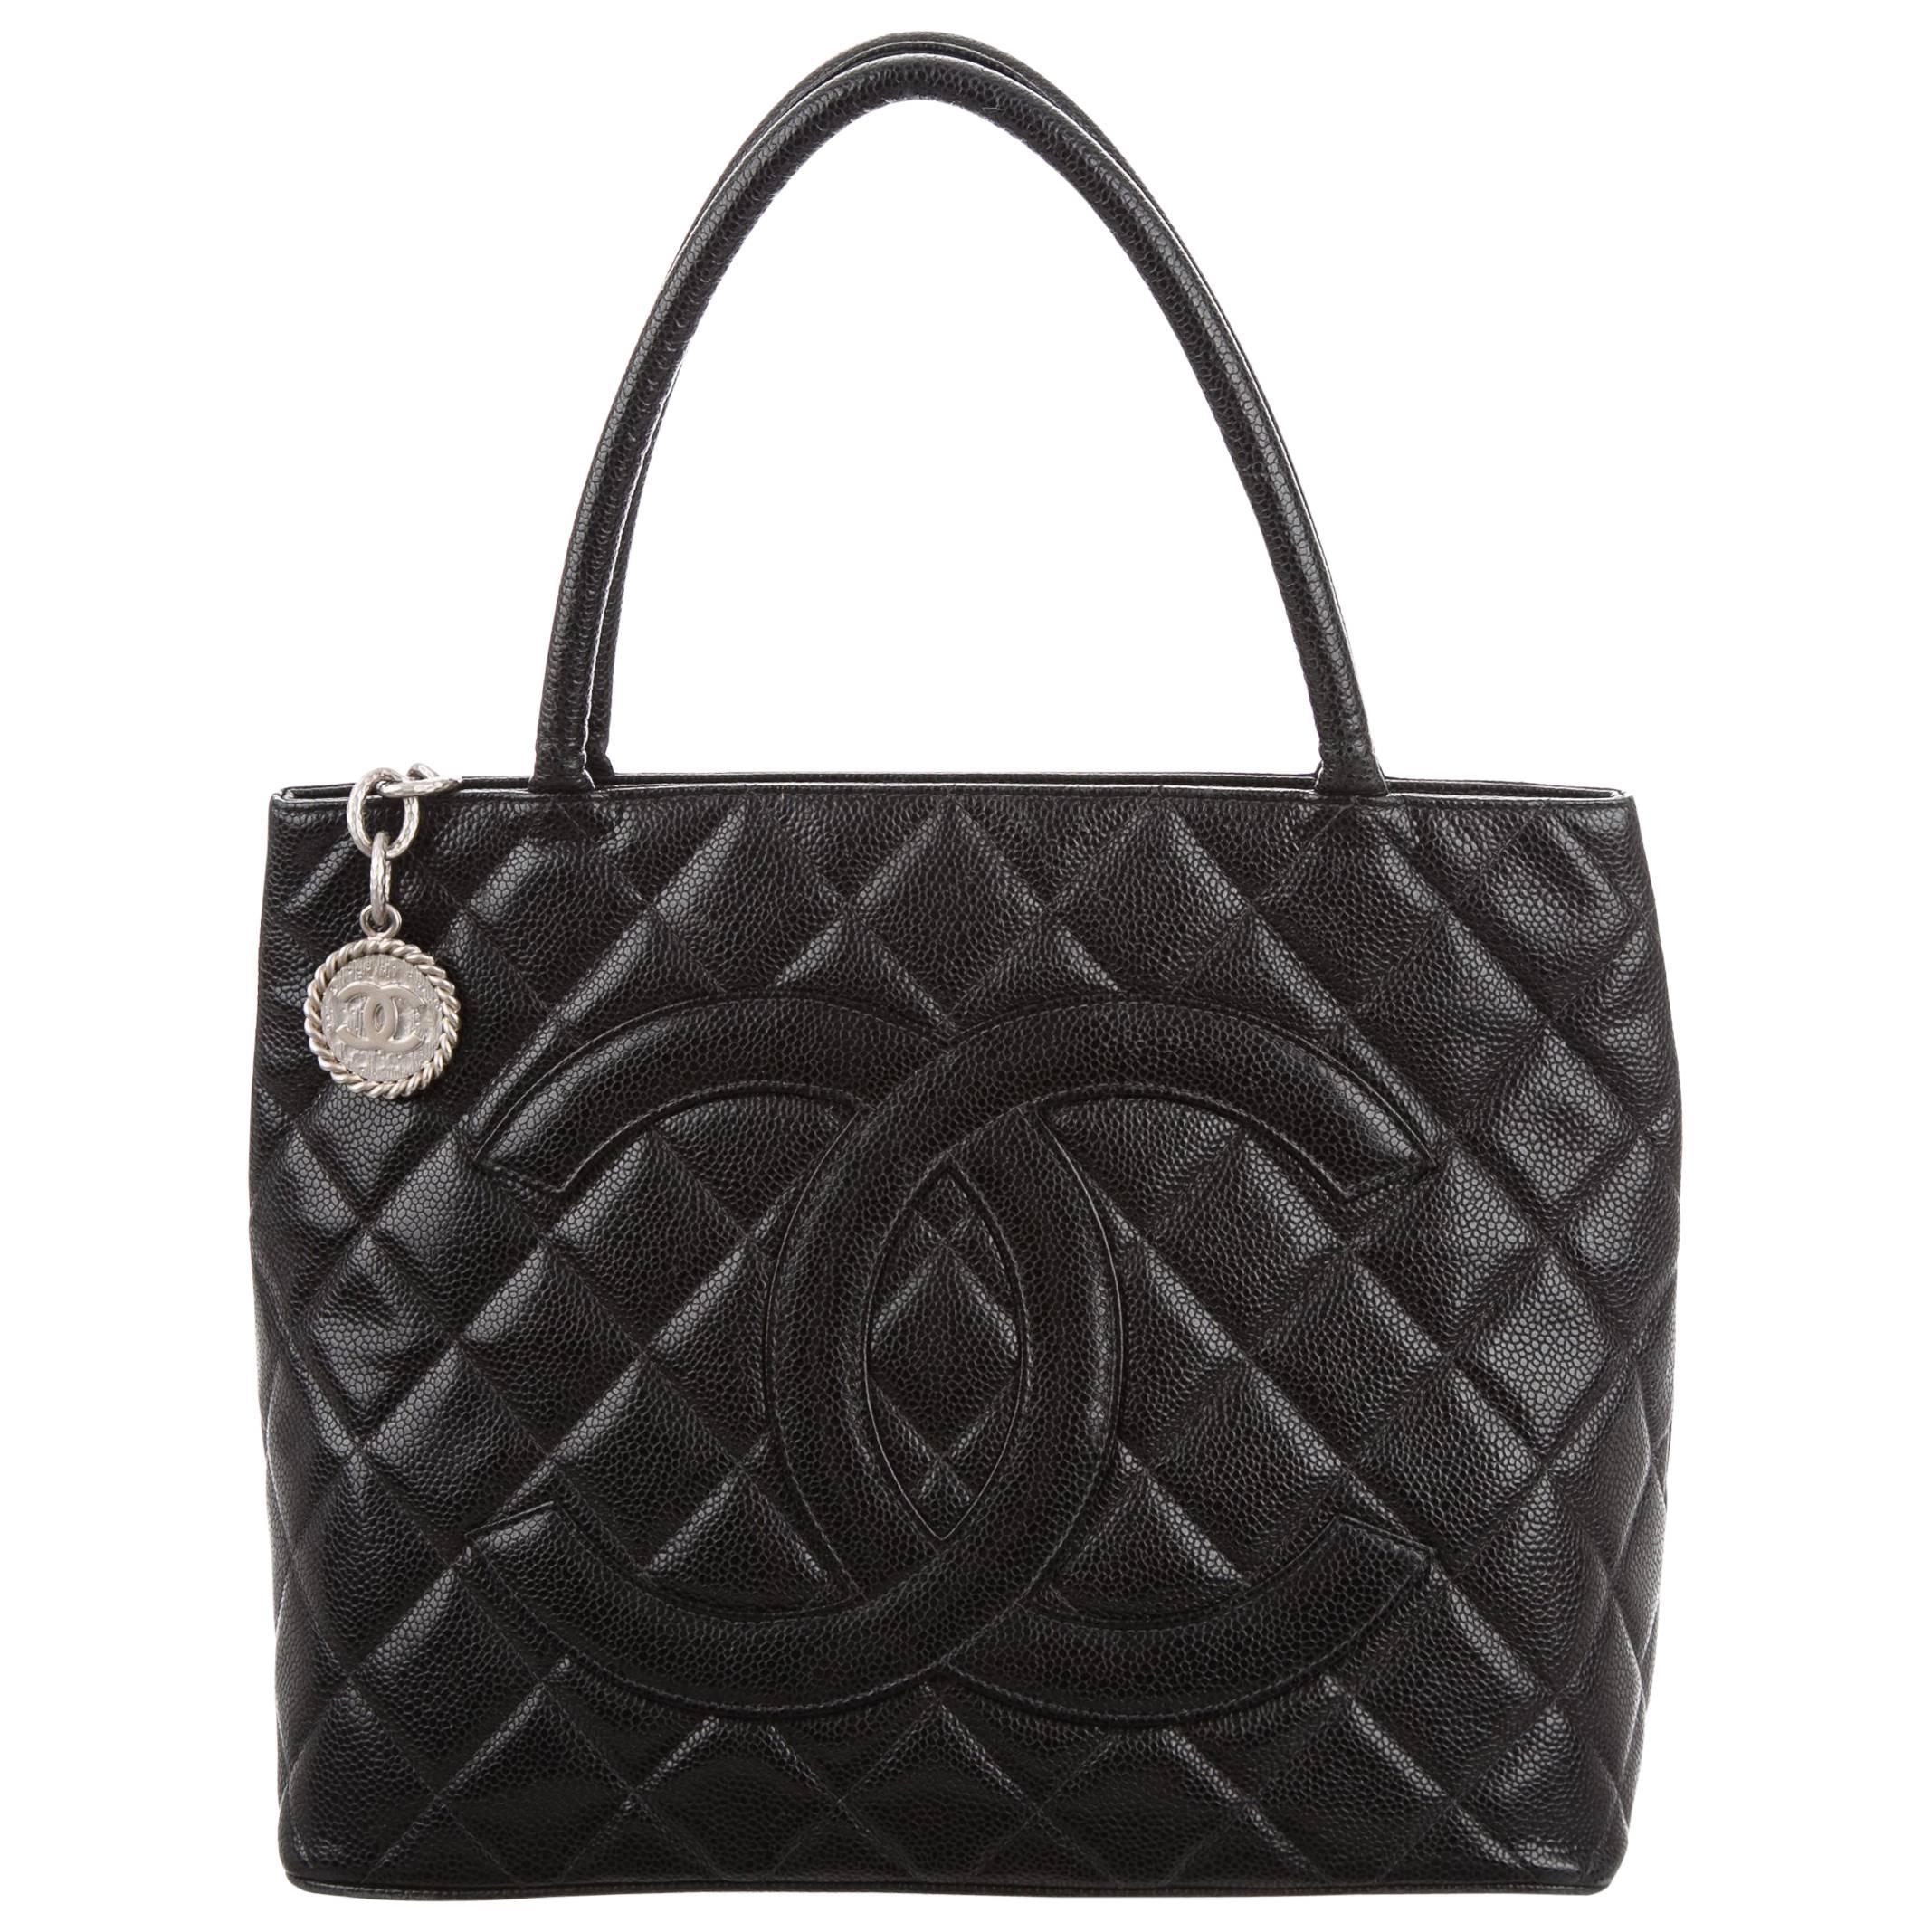 Chanel Black Caviar Silver Carryall Classic Evening Top Handle Tote Bag